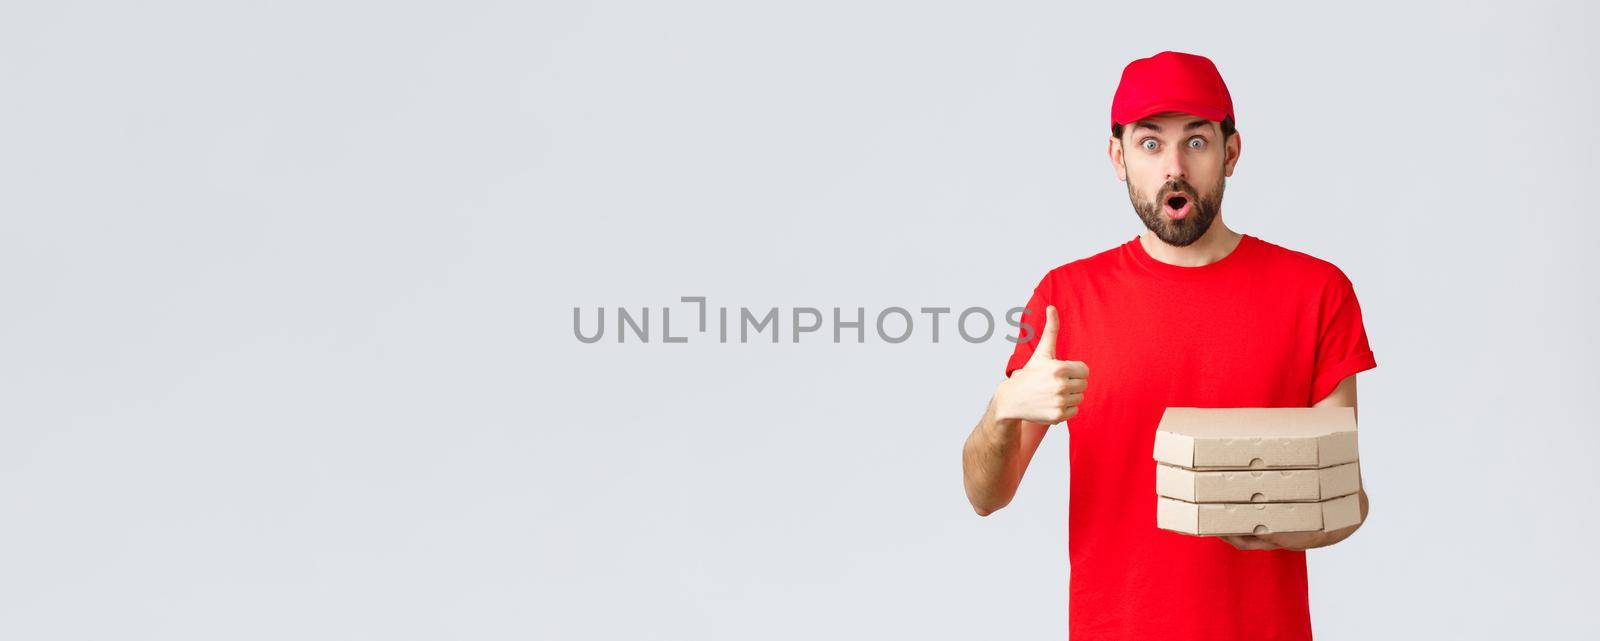 Food delivery, quarantine, stay home and order online concept. Surprised and amazed bearded courier in red t-shirt, cap gasping impressed, show thumb-up, bring order pizza, grey background.